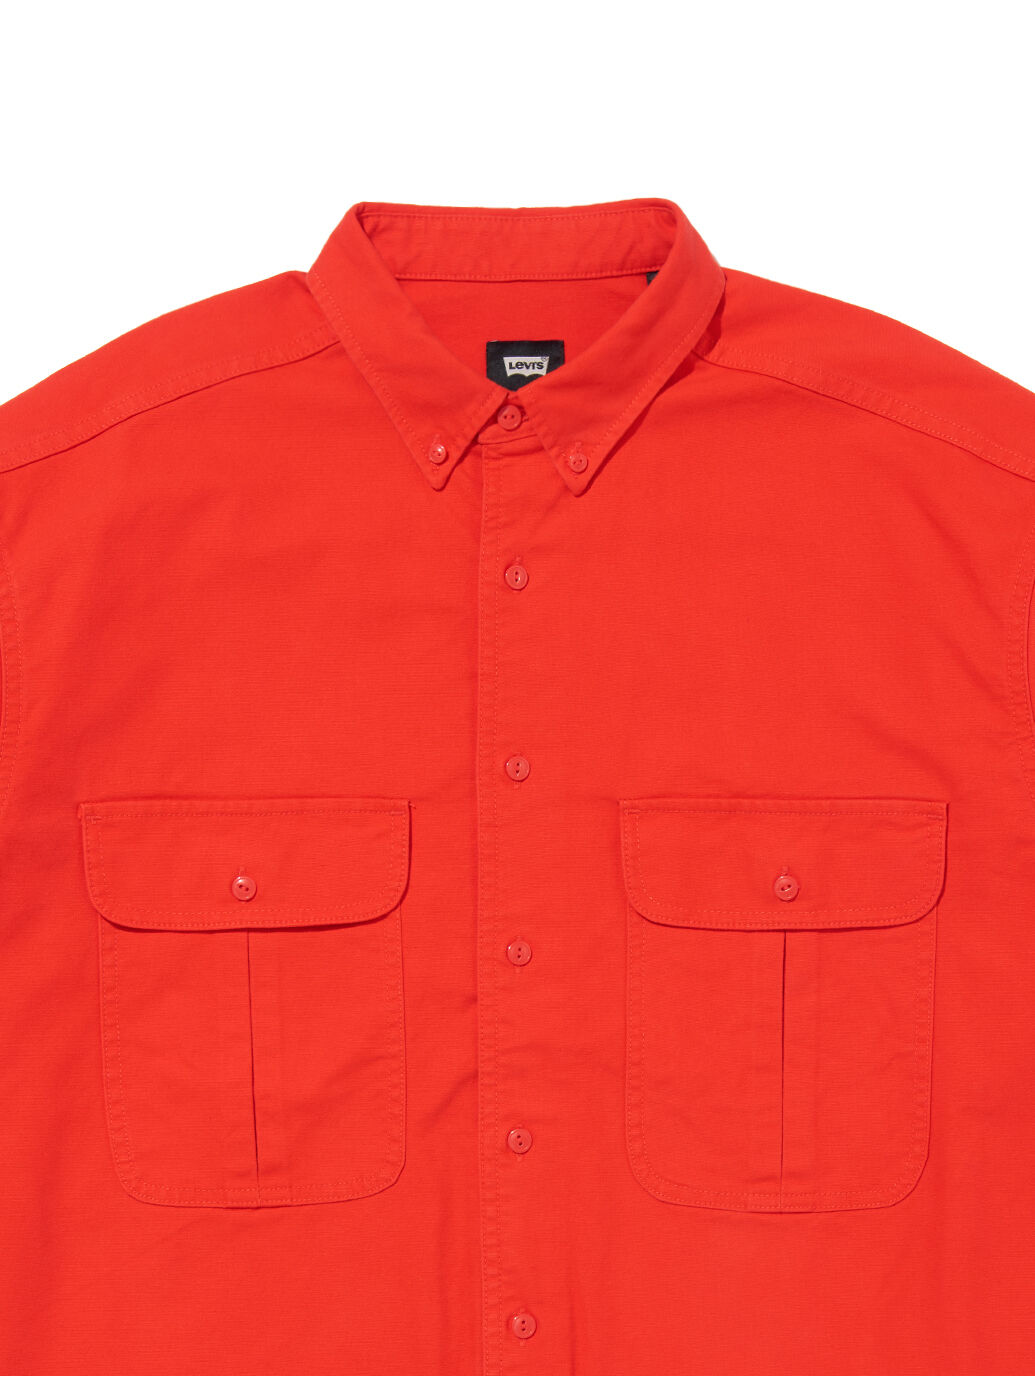 LEVI'S® SKATE シャツ オレンジ FIERY RED｜リーバイス® 公式通販